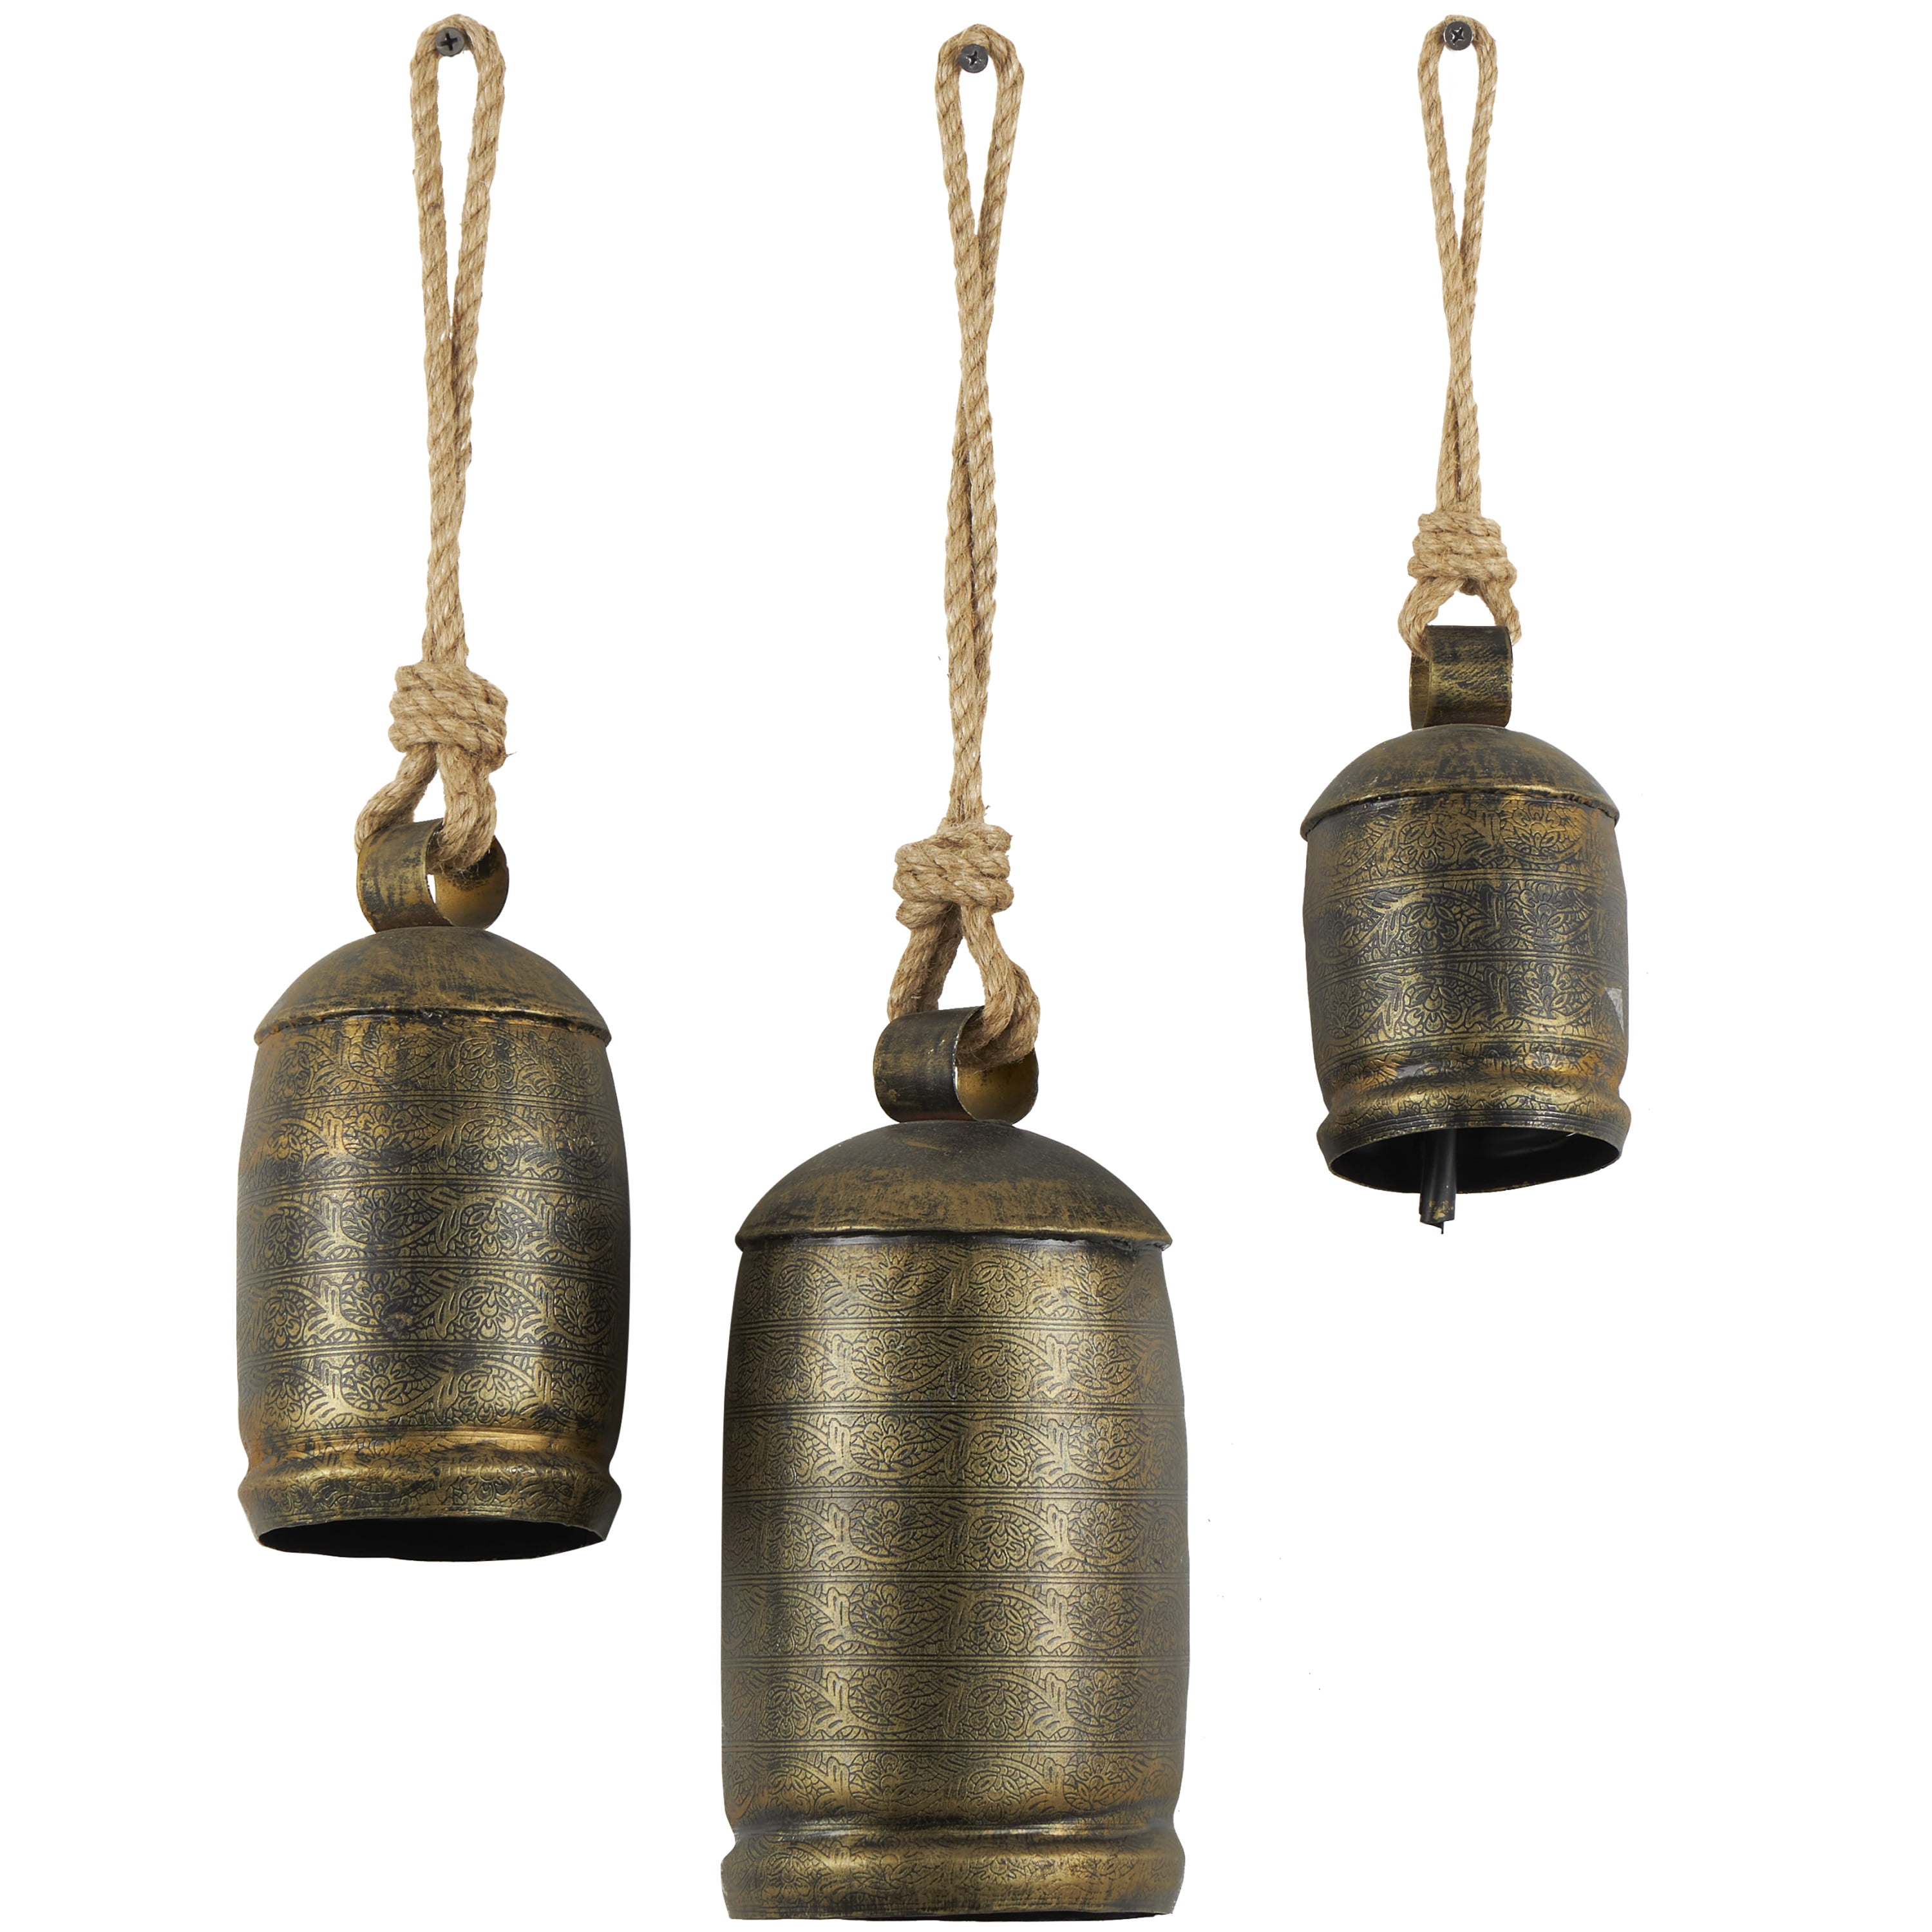 DecMode Bronze Metal Tibetan Inspired Decorative Hanging Bell Chime Set of  3 5, 4, 3H, Features a Round Shape with Solid Pattern and Metal Clappers